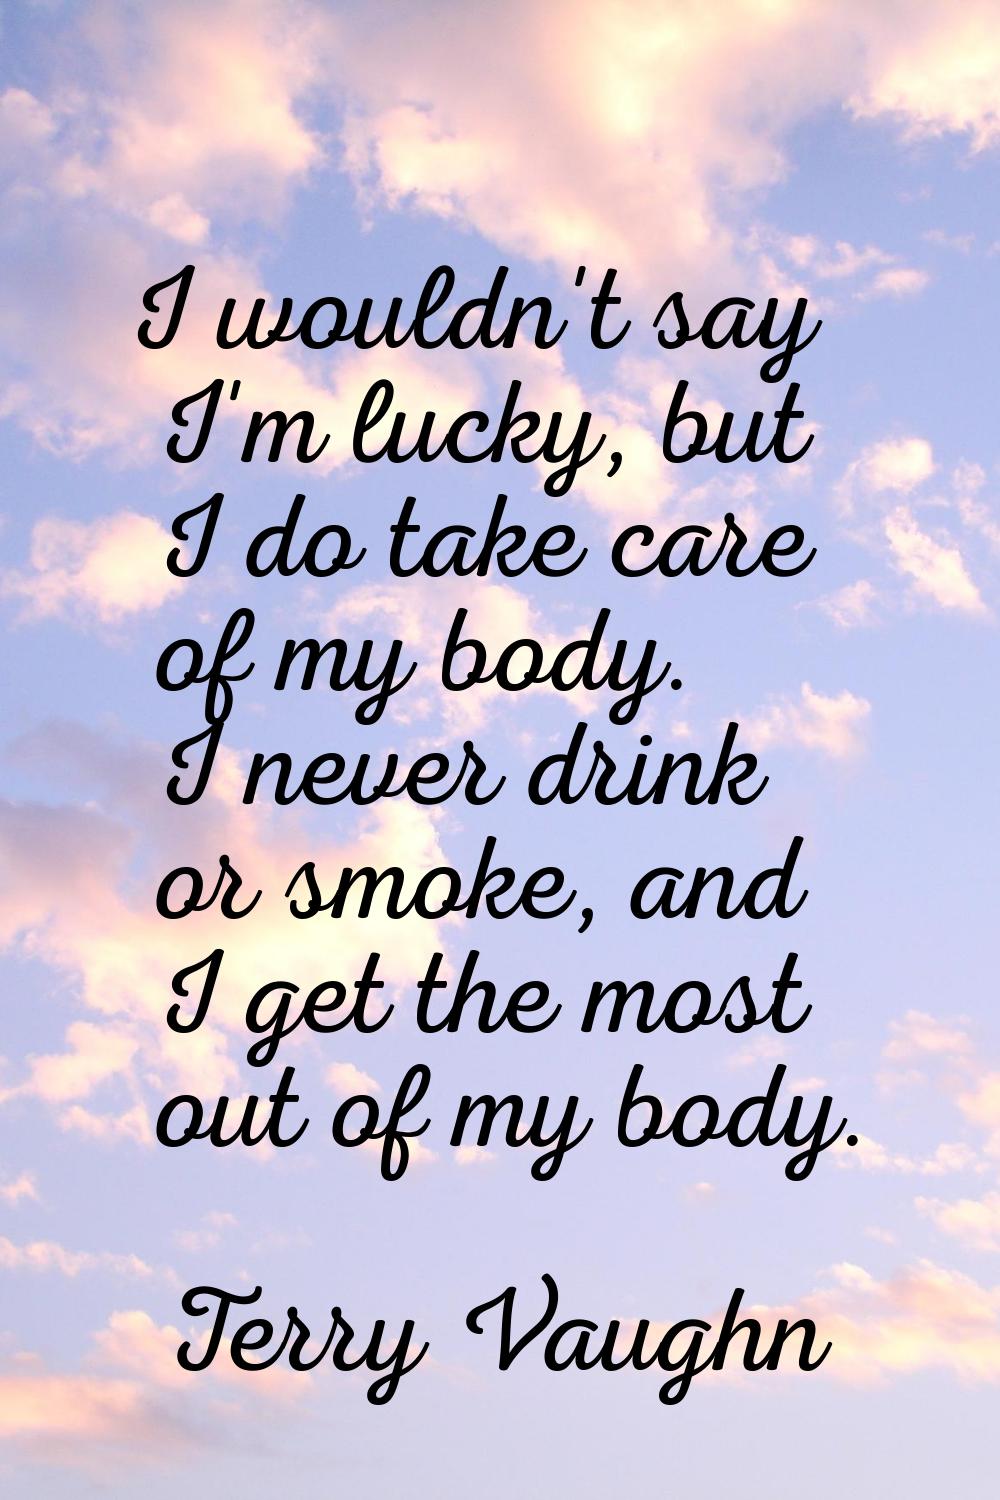 I wouldn't say I'm lucky, but I do take care of my body. I never drink or smoke, and I get the most